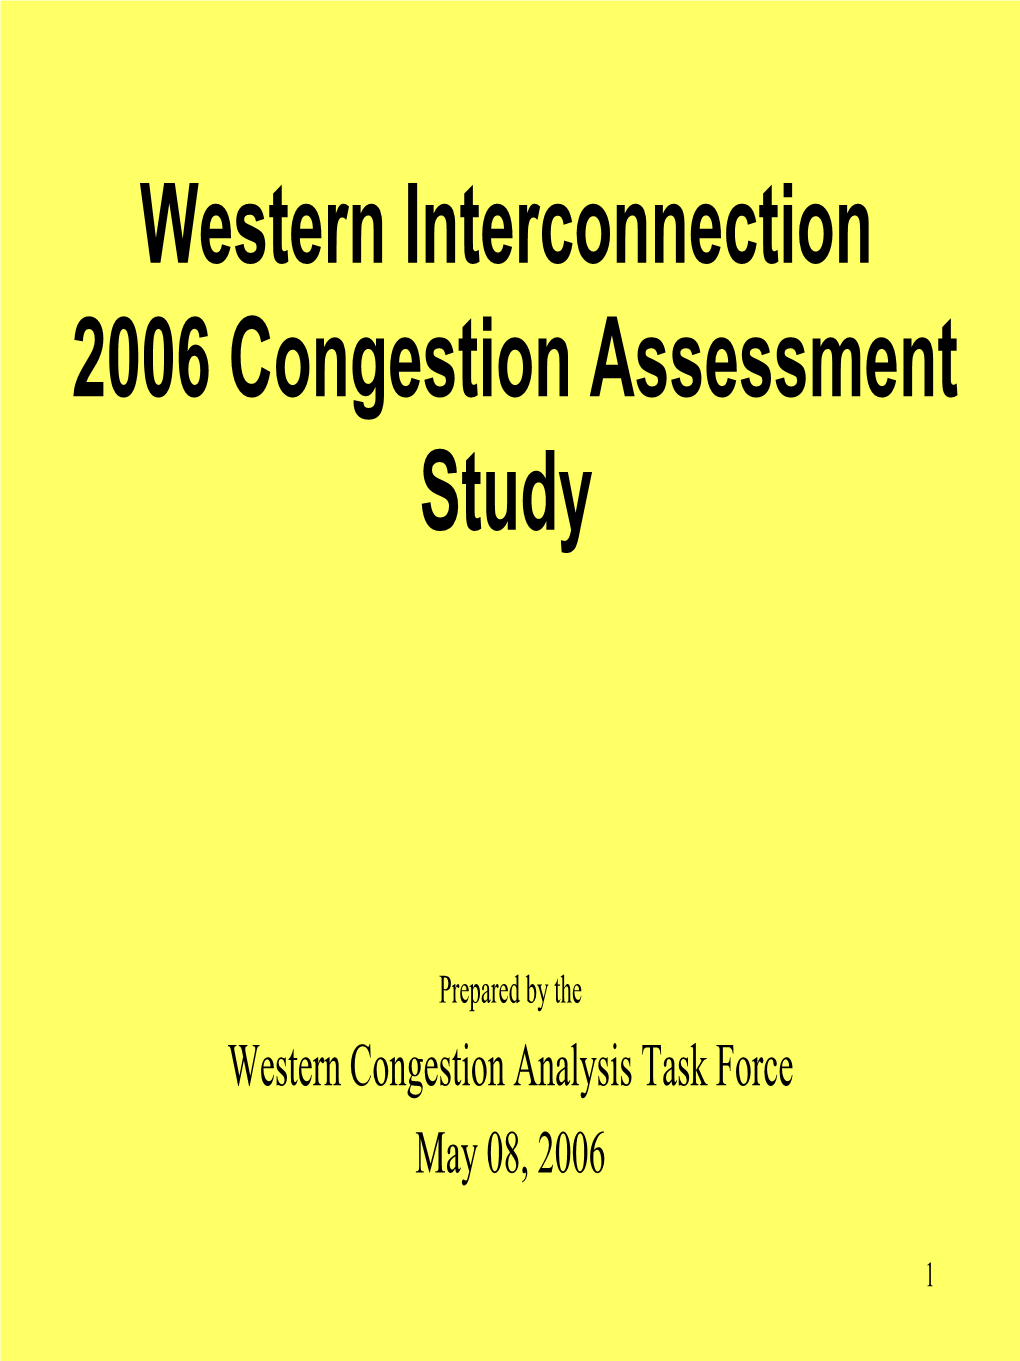 National Electric Transmission Study 2006 Western Interconnection